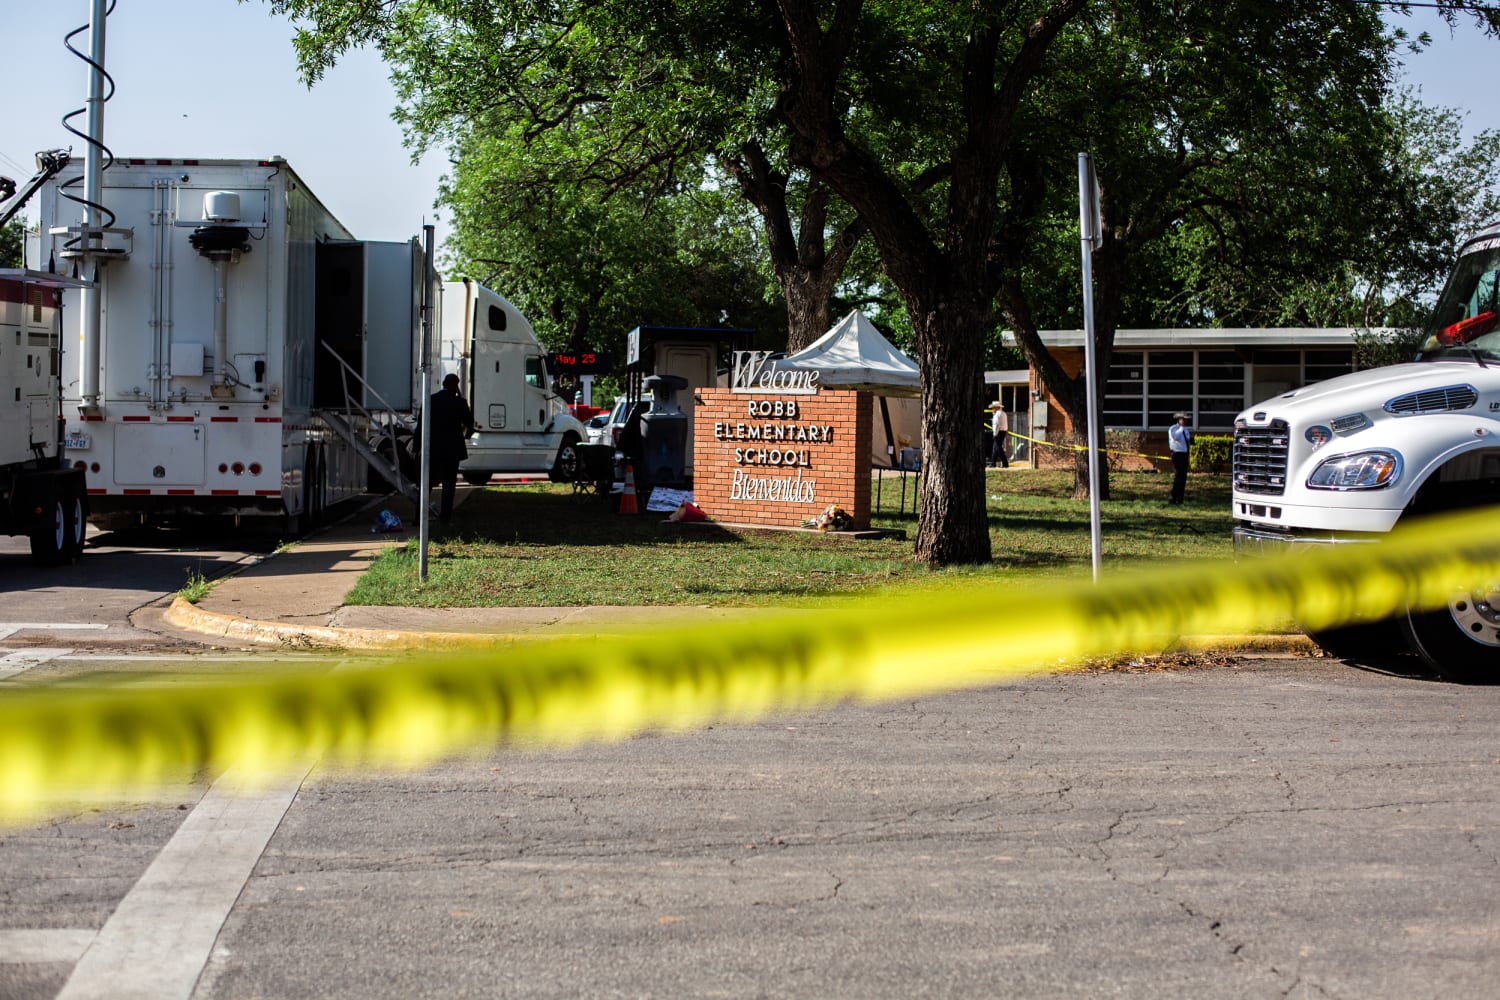 Report says Uvalde police had gunman in sights before he entered school — but didn't pull trigger